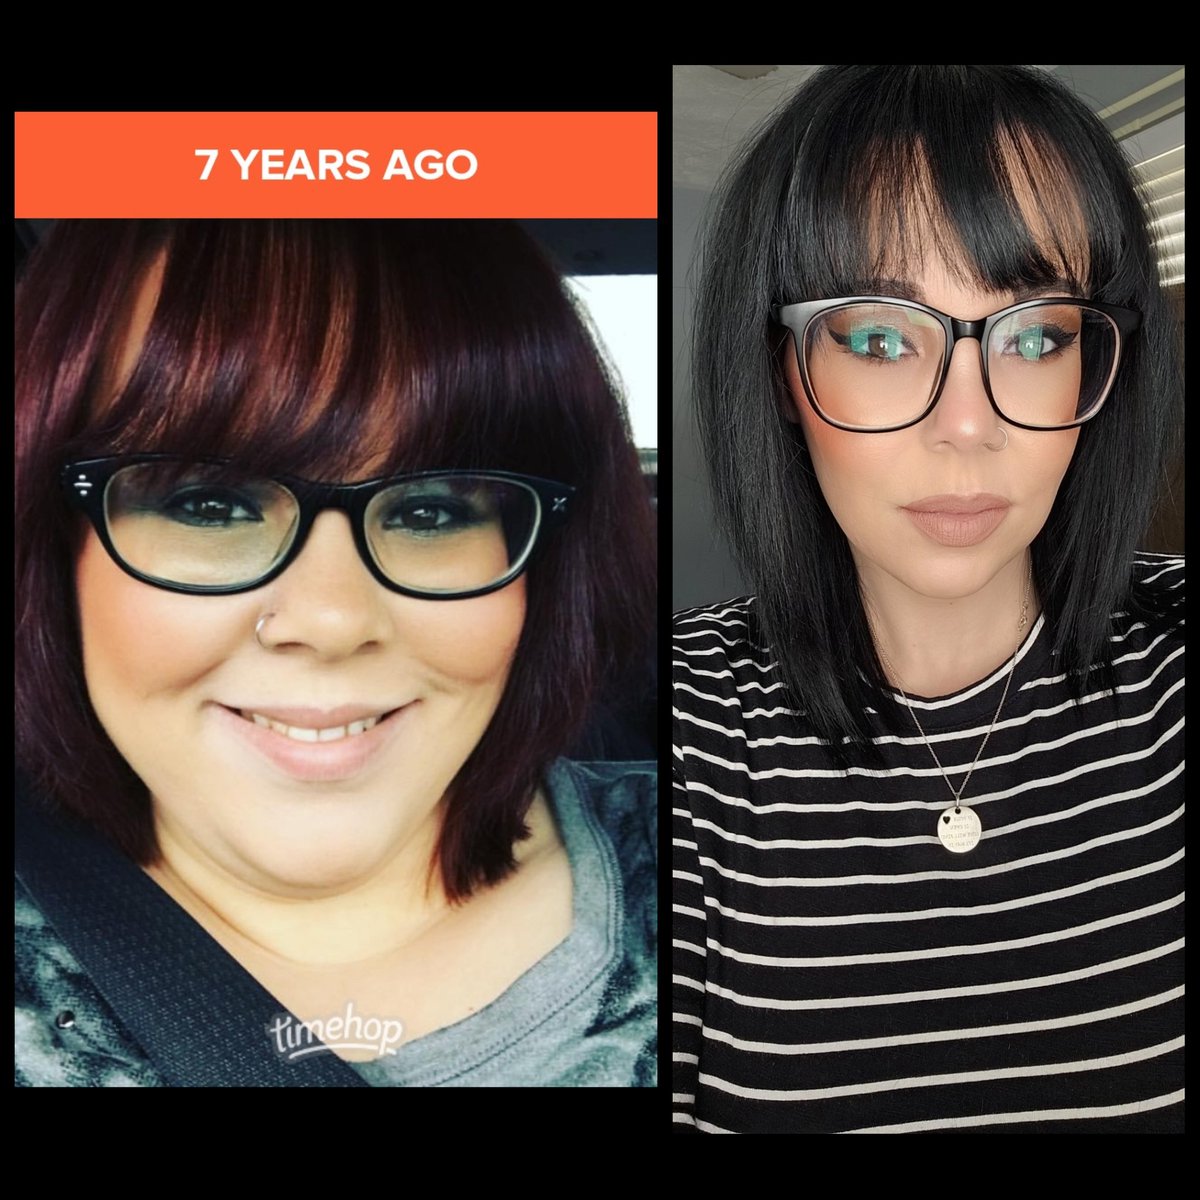 Let's get one thing straight and two things gay,
I've never been ugly. Just overweight lol. 

#TheIncrediblyShrinkingShanna #Weightloss #WeightlossWednesday #weightlossjourney